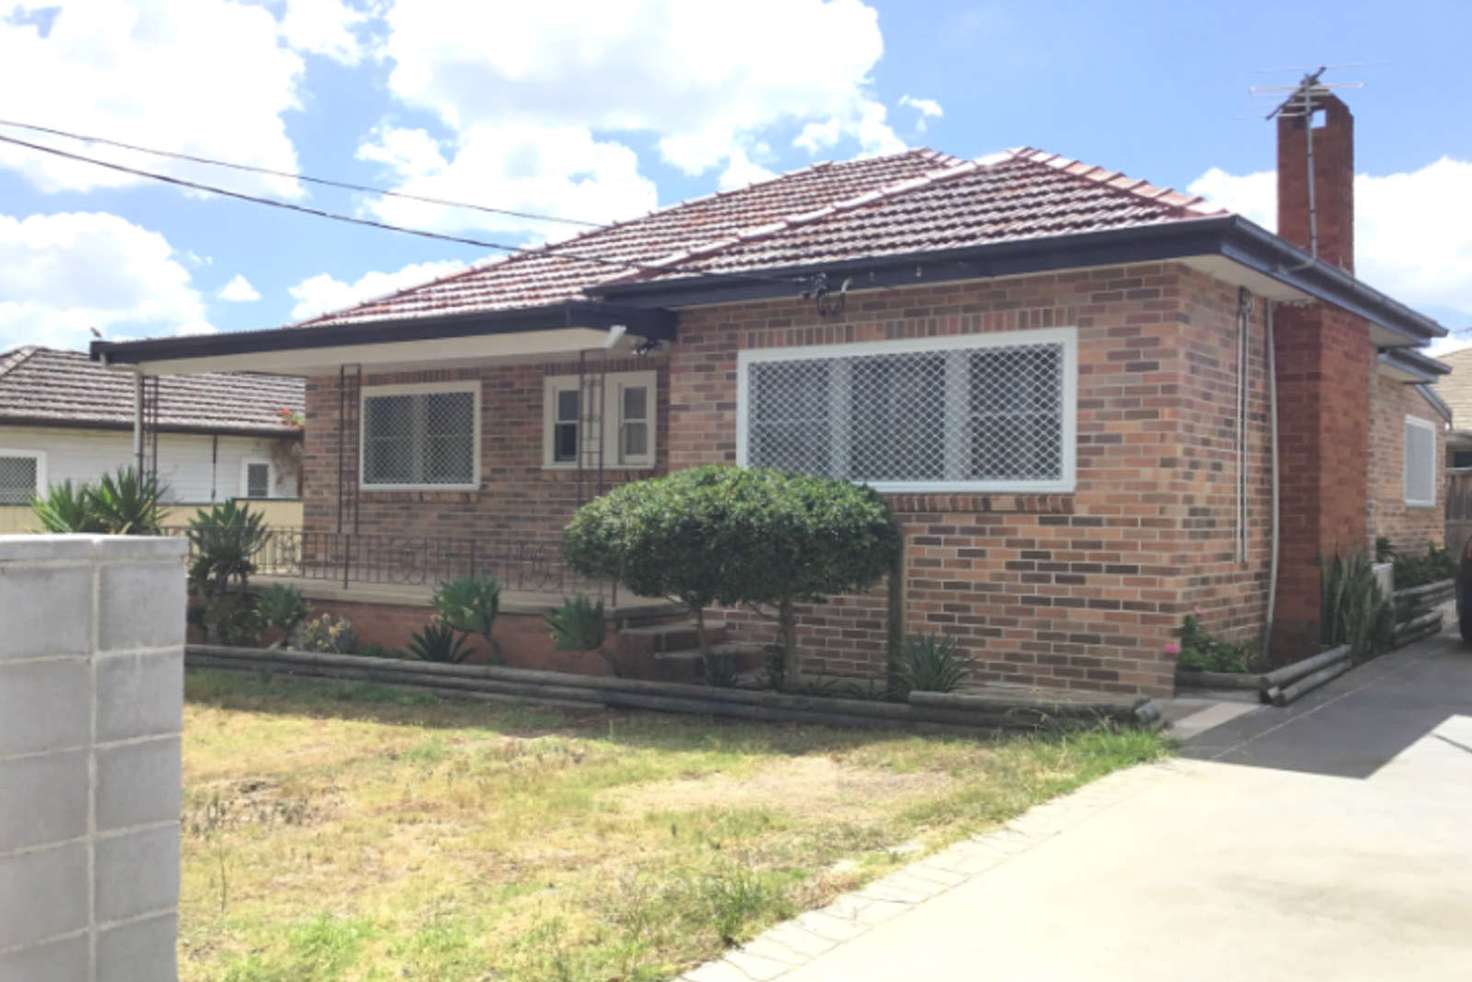 Main view of Homely house listing, 4 Levuka st, Cabramatta NSW 2166